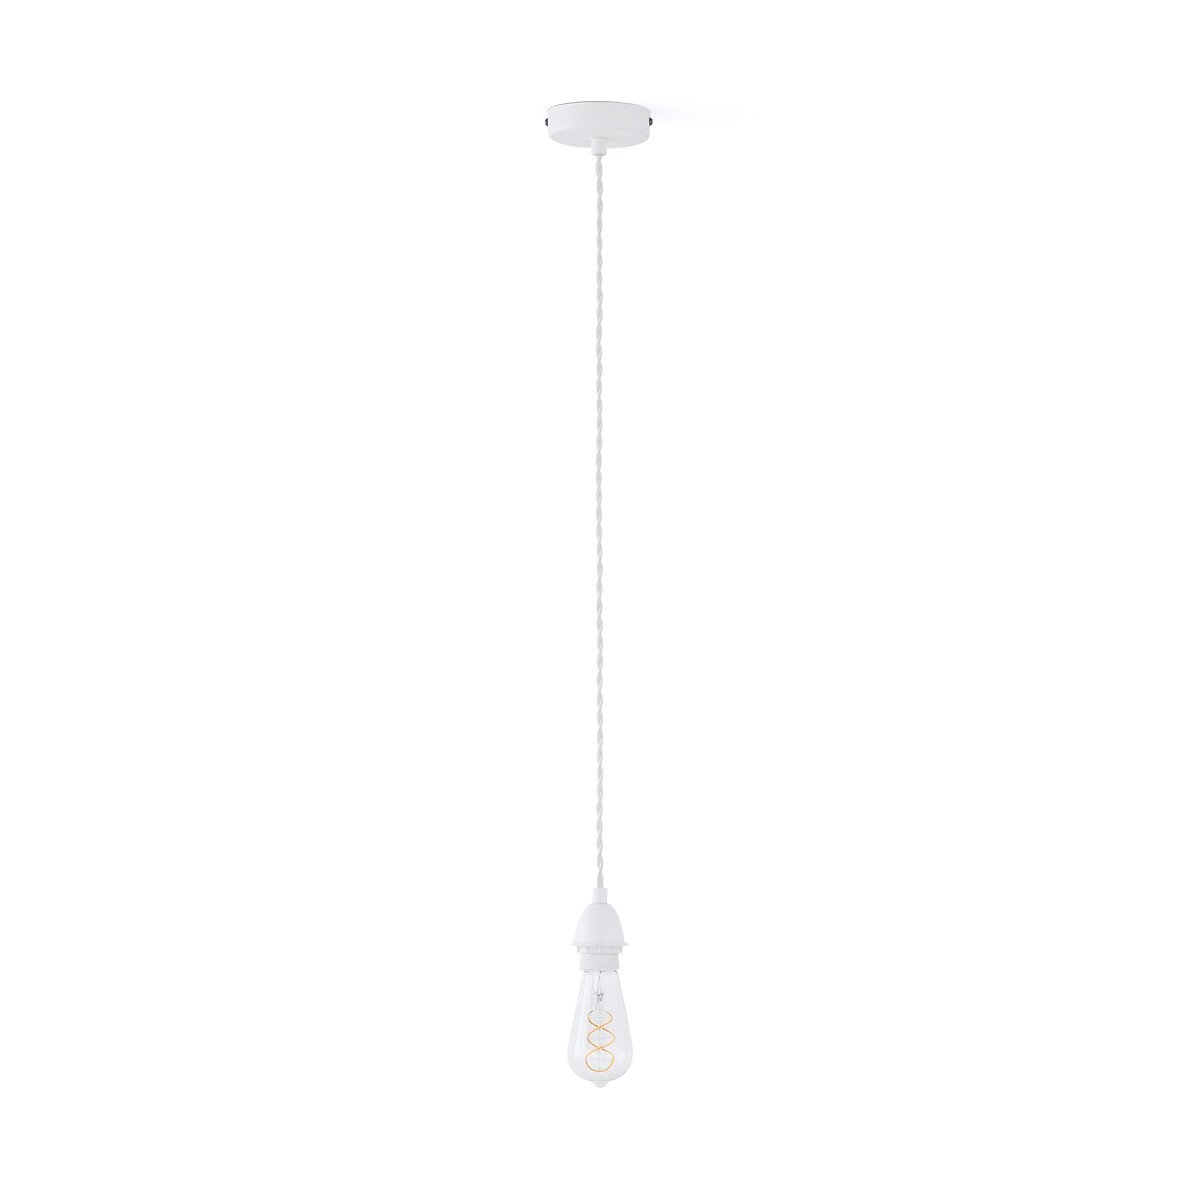 Baulind Electric E27 Cable for Ceiling Light